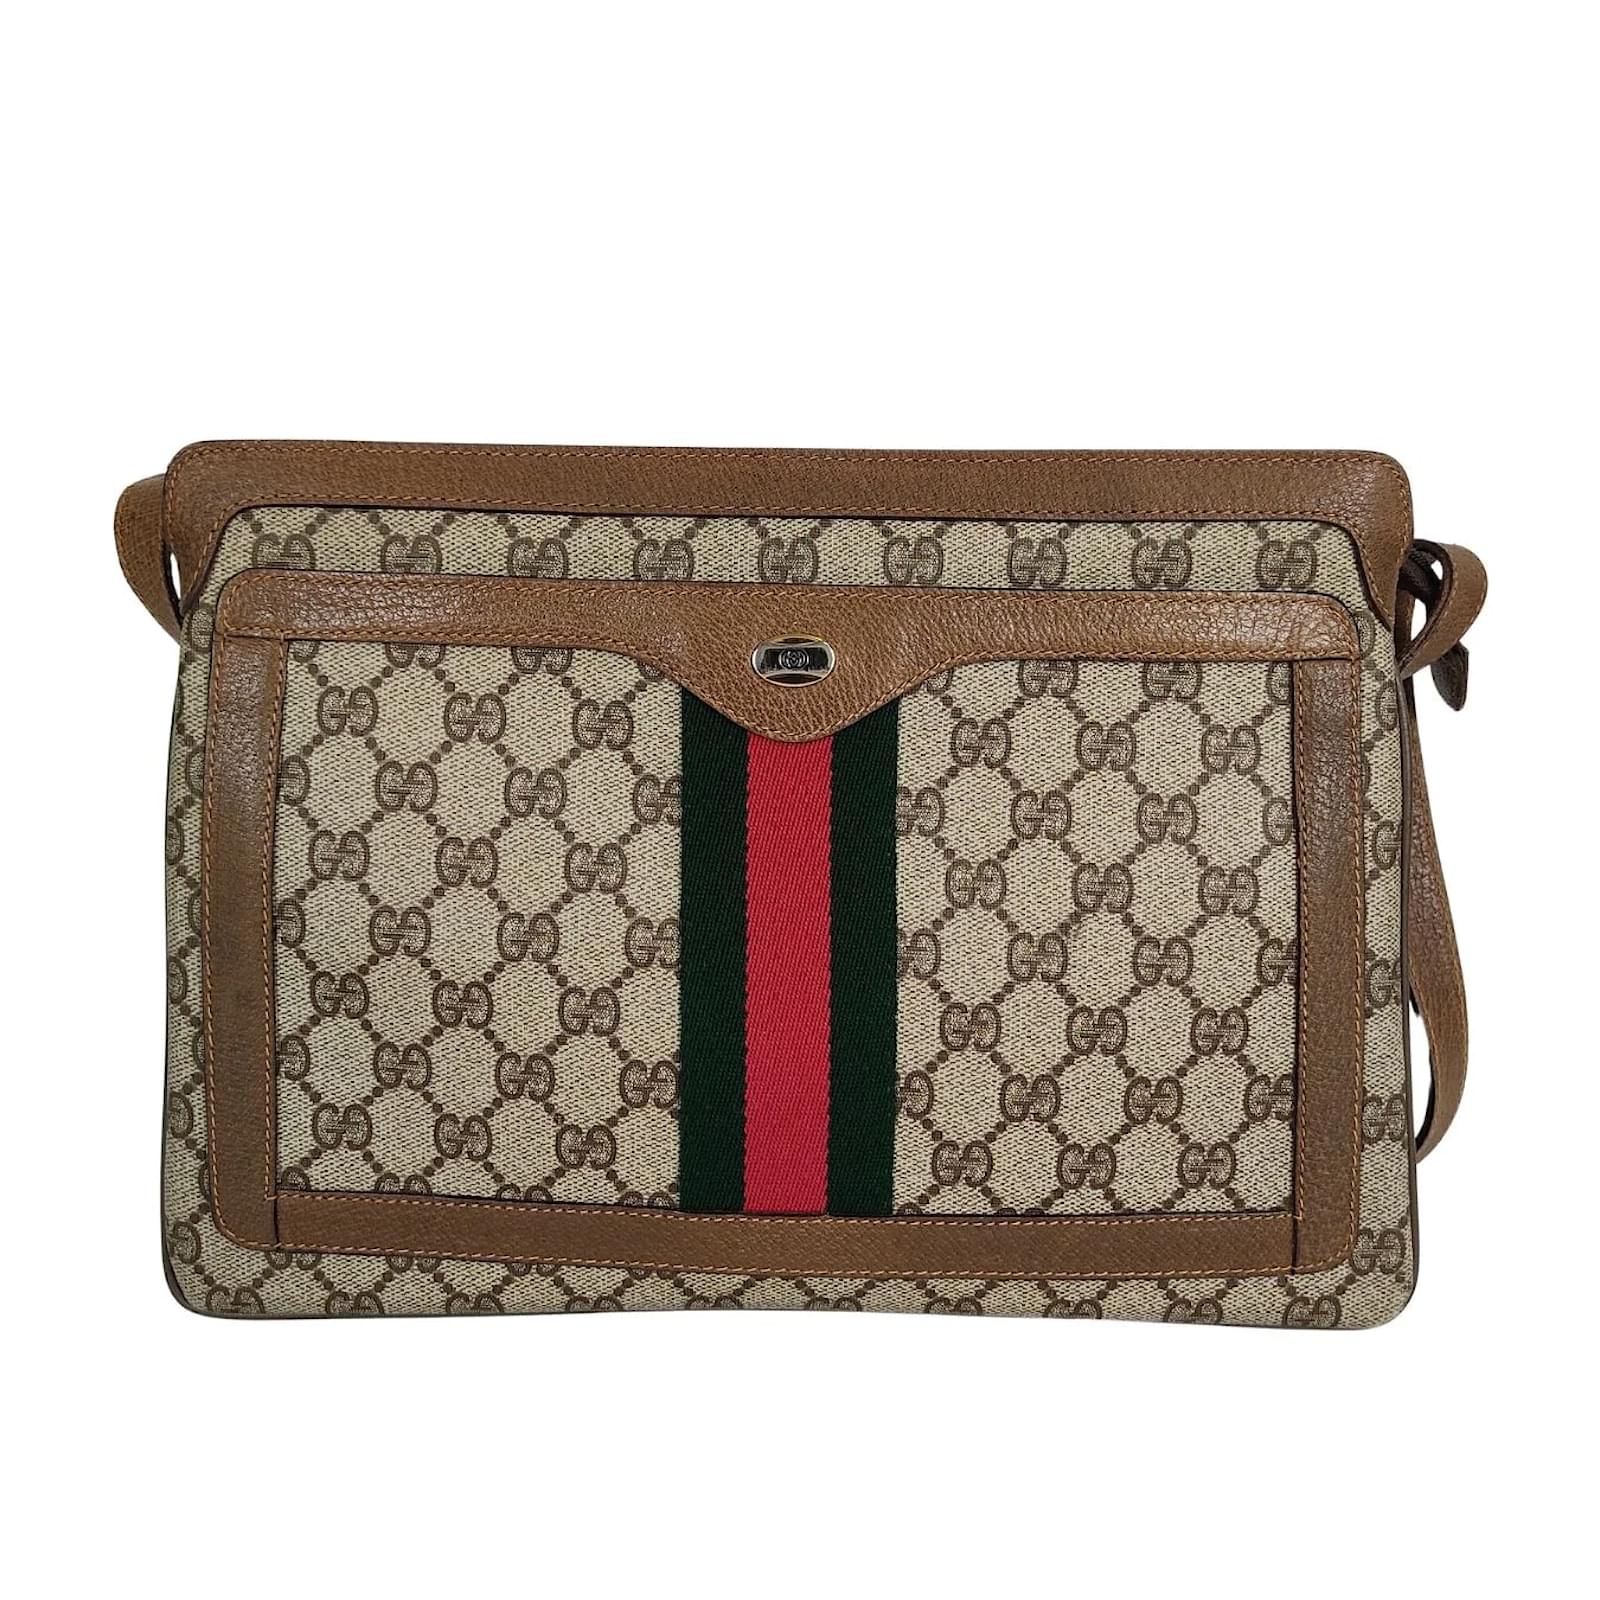 Authentic vintage GUCCI web sherry line crossbody